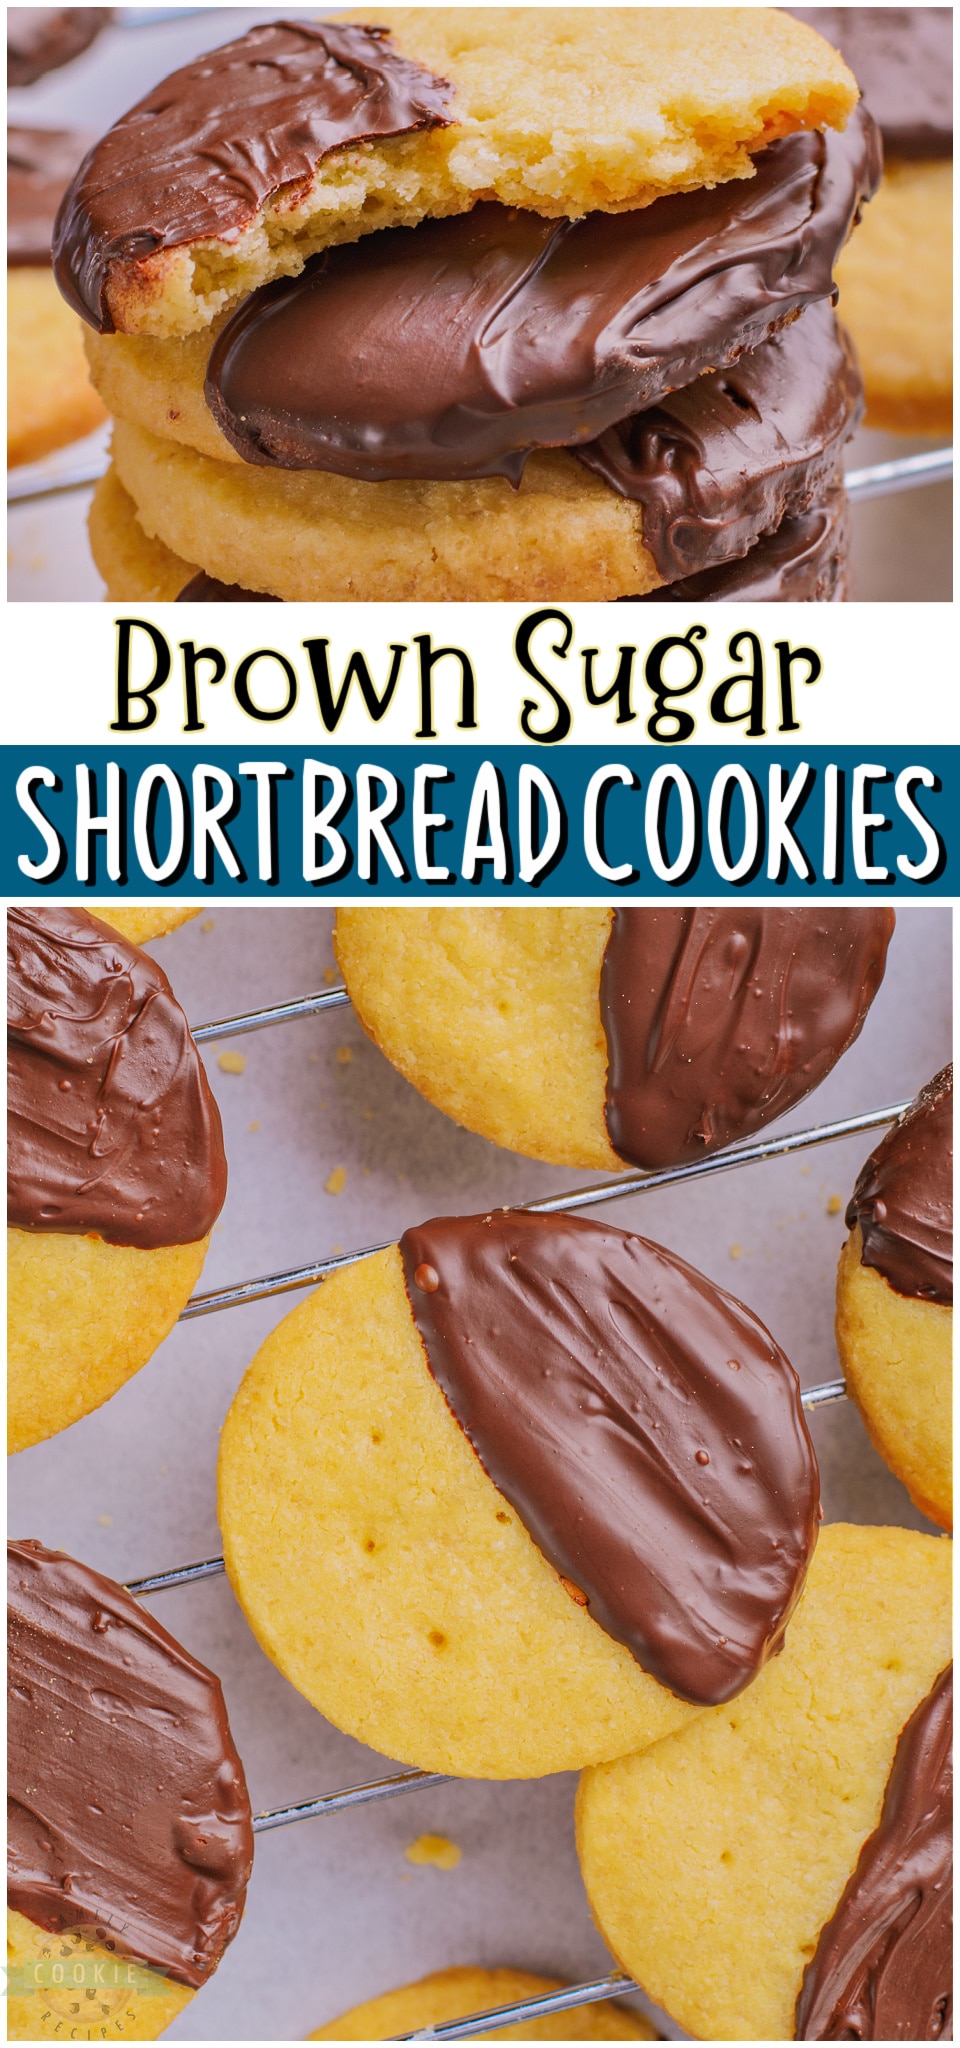 Brown Sugar Shortbread cookies are tender, crisp shortbread made with brown sugar for great flavor! Baked, then dipped in chocolate for a perfect shortbread cookie.